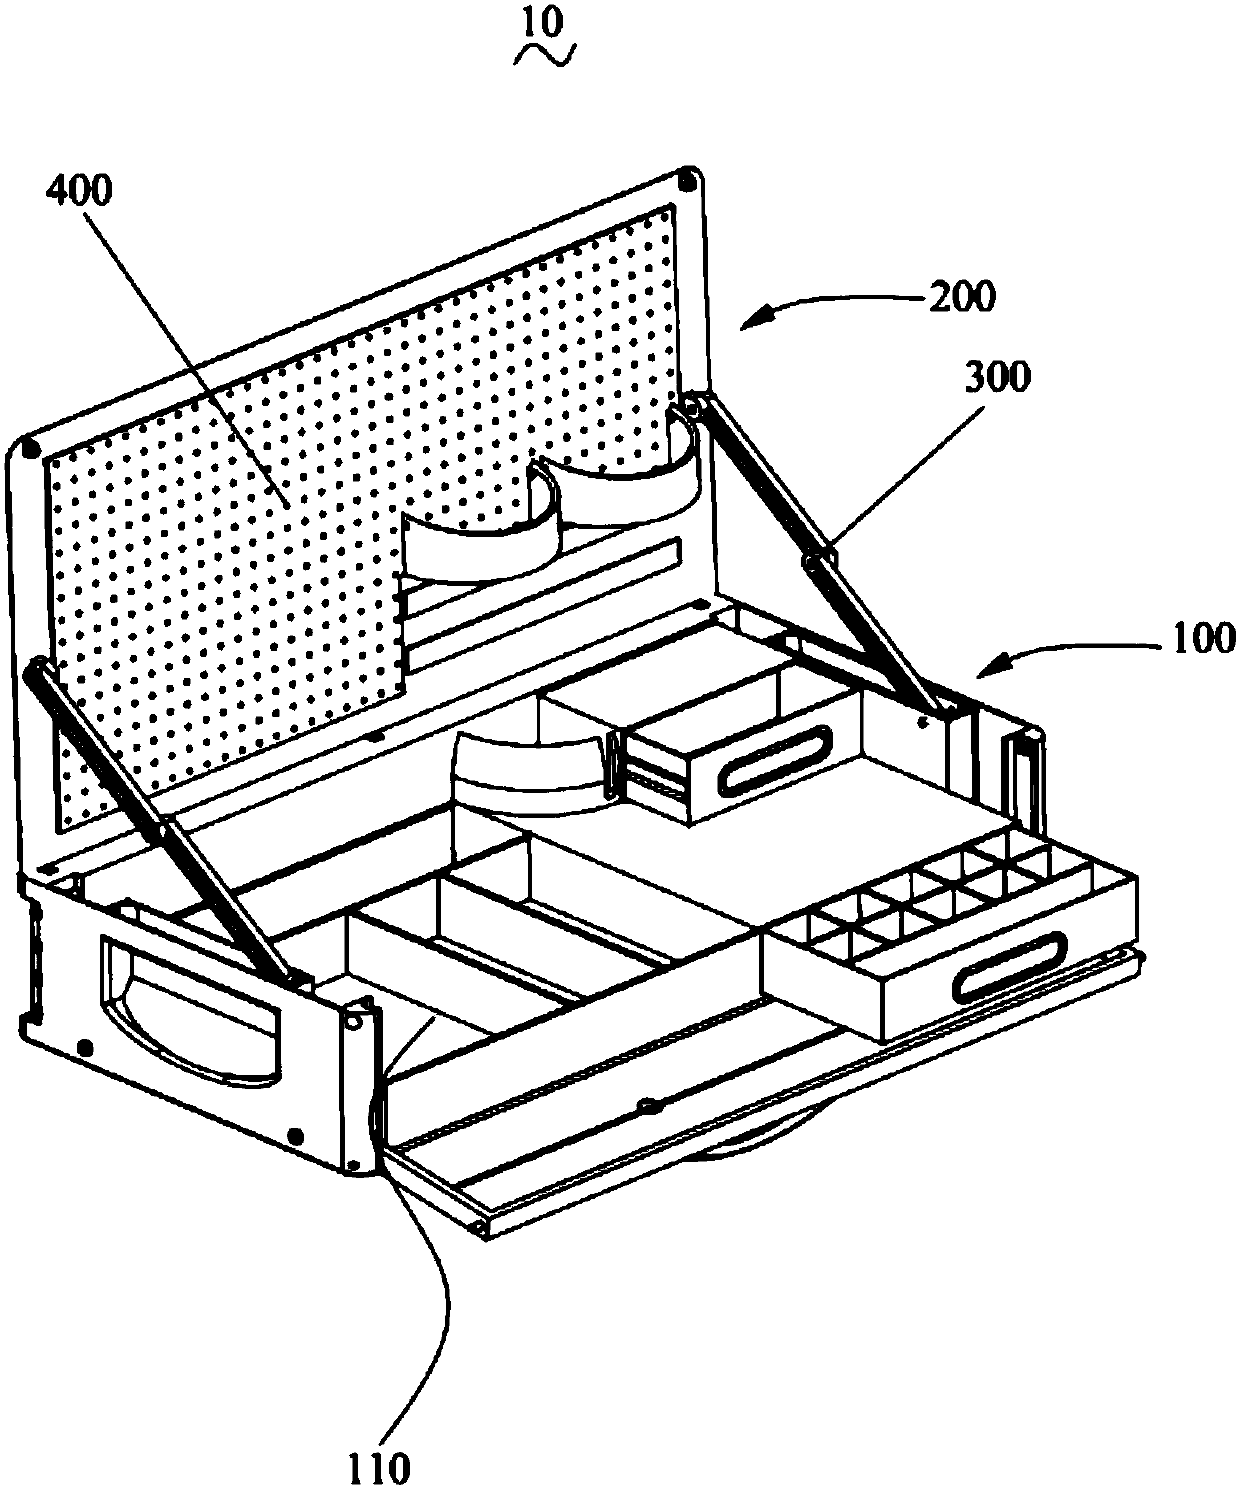 Fruit and vegetable containing device applicable to outing picnics